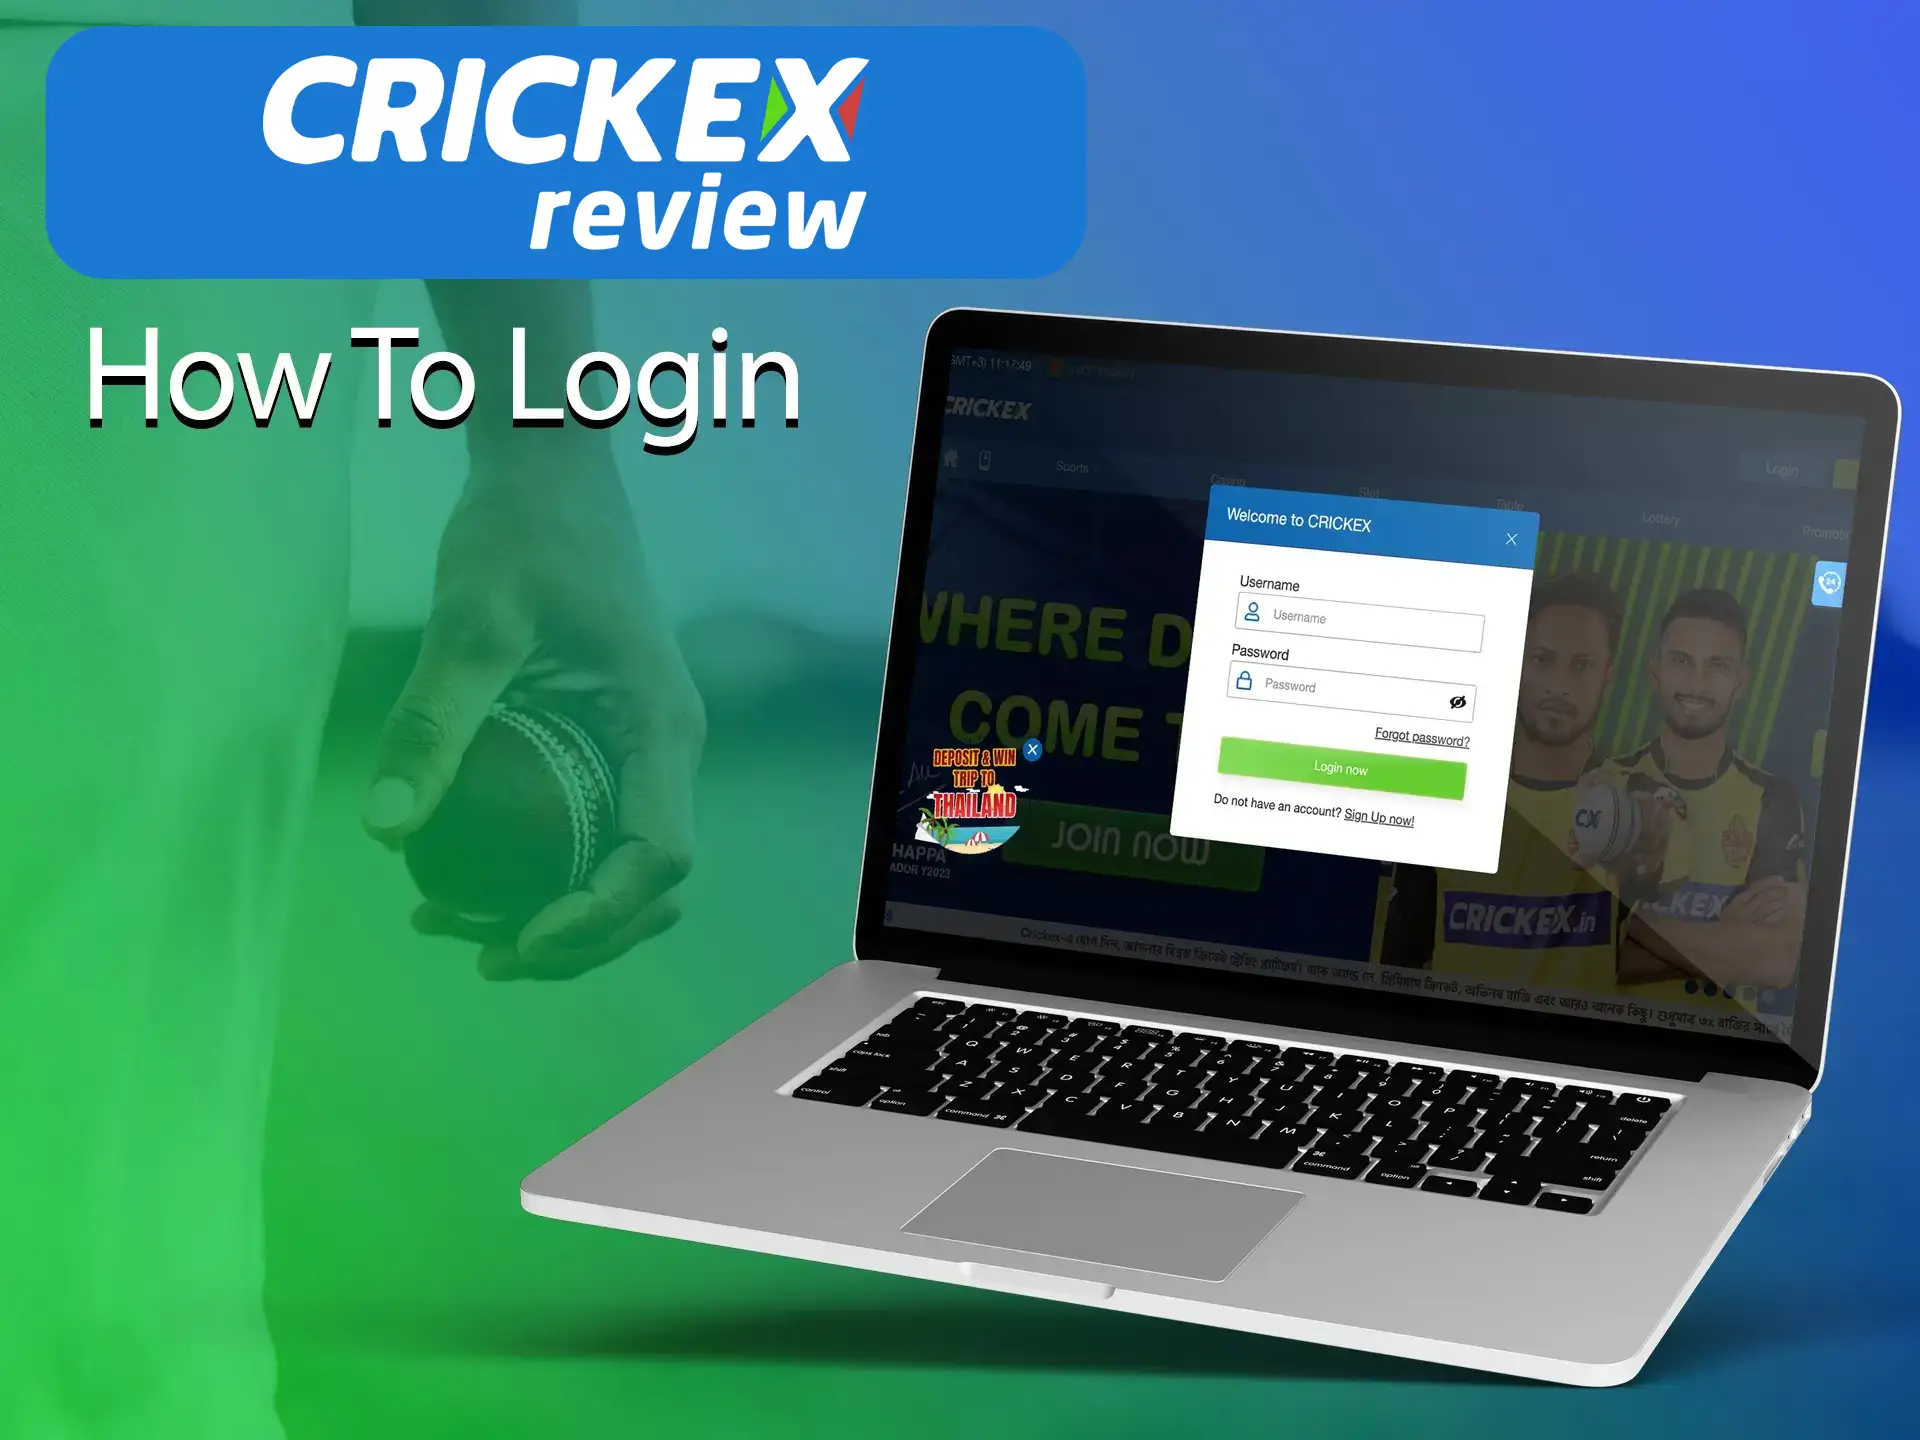 Crickex provides its clients with a simple and convenient personal account on the website.